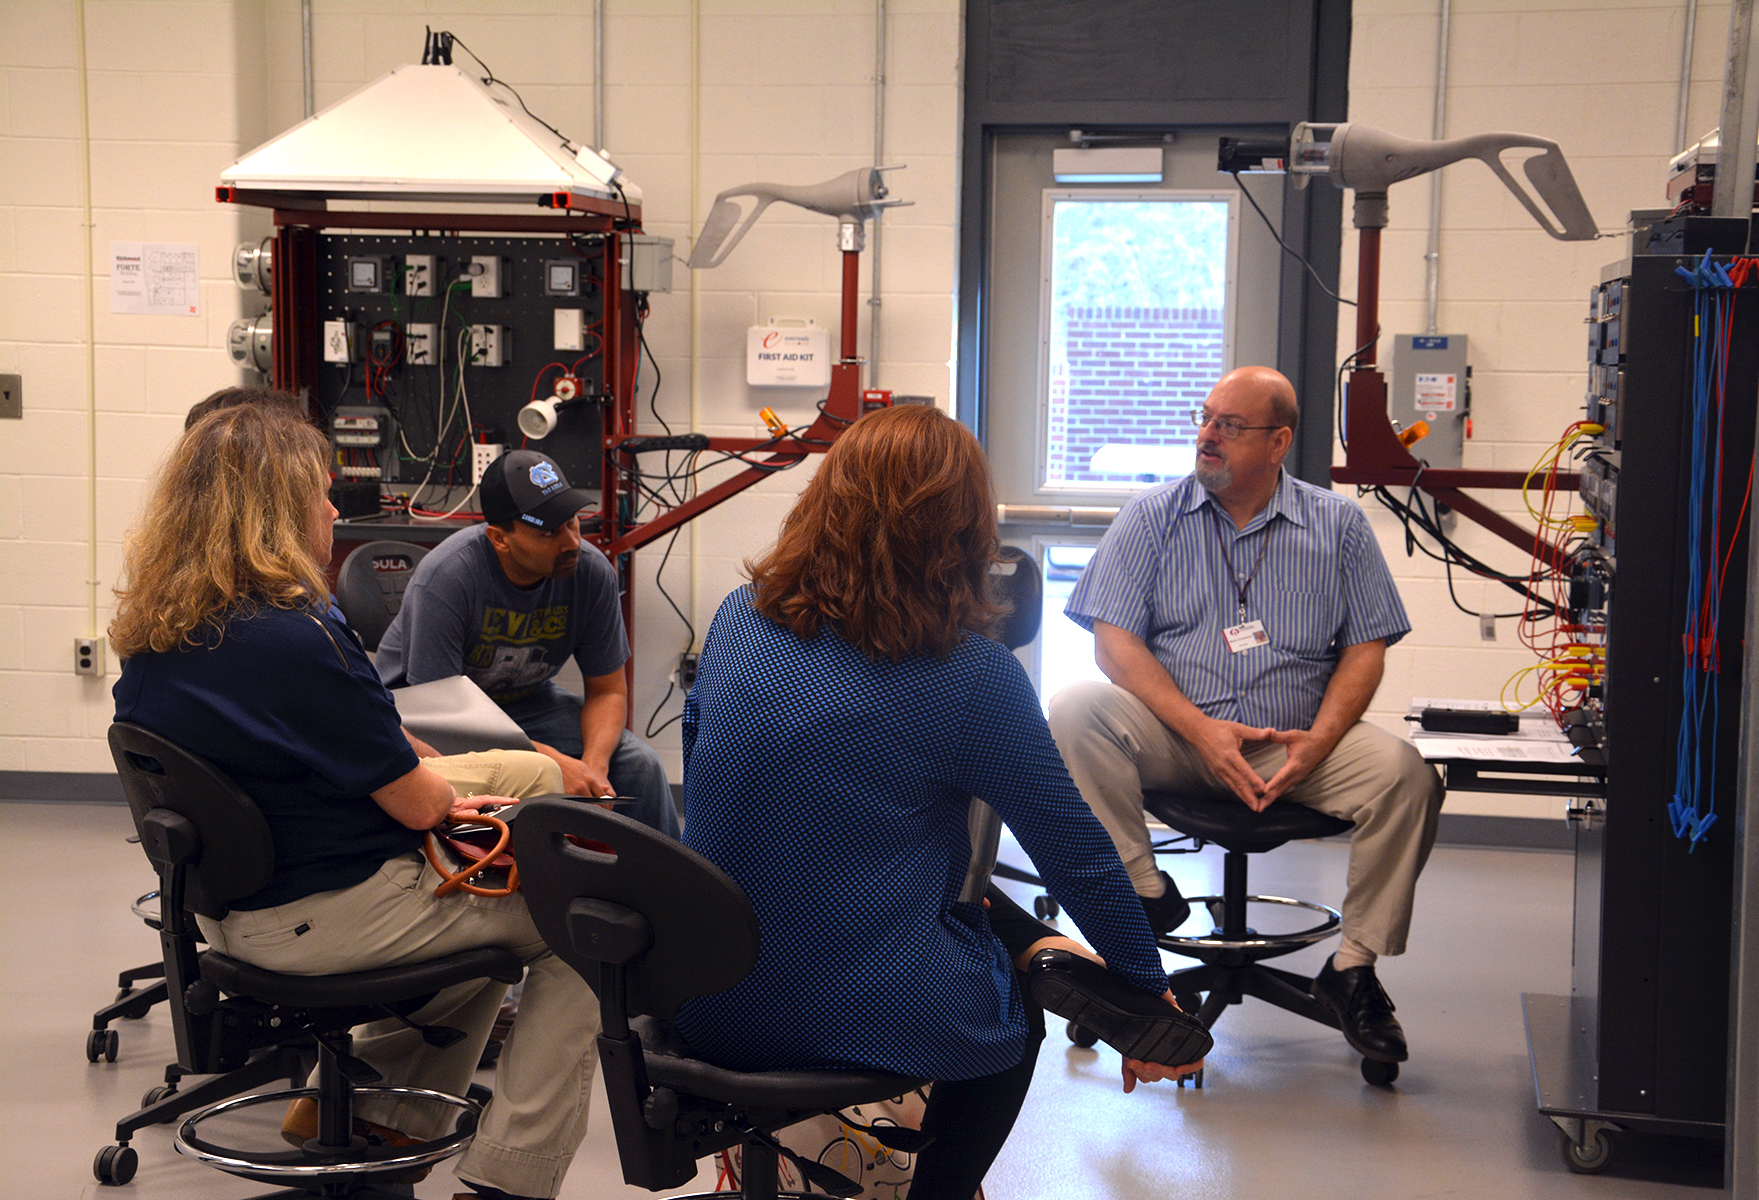 Lead instructor for the Industrial Systems Technology program at RichmondCC, Mark Treadaway, talks to educators from Richmond and Scotland counties about the skills students gain in his program and the career opportunities they have upon earning a degree, diploma or certificate.